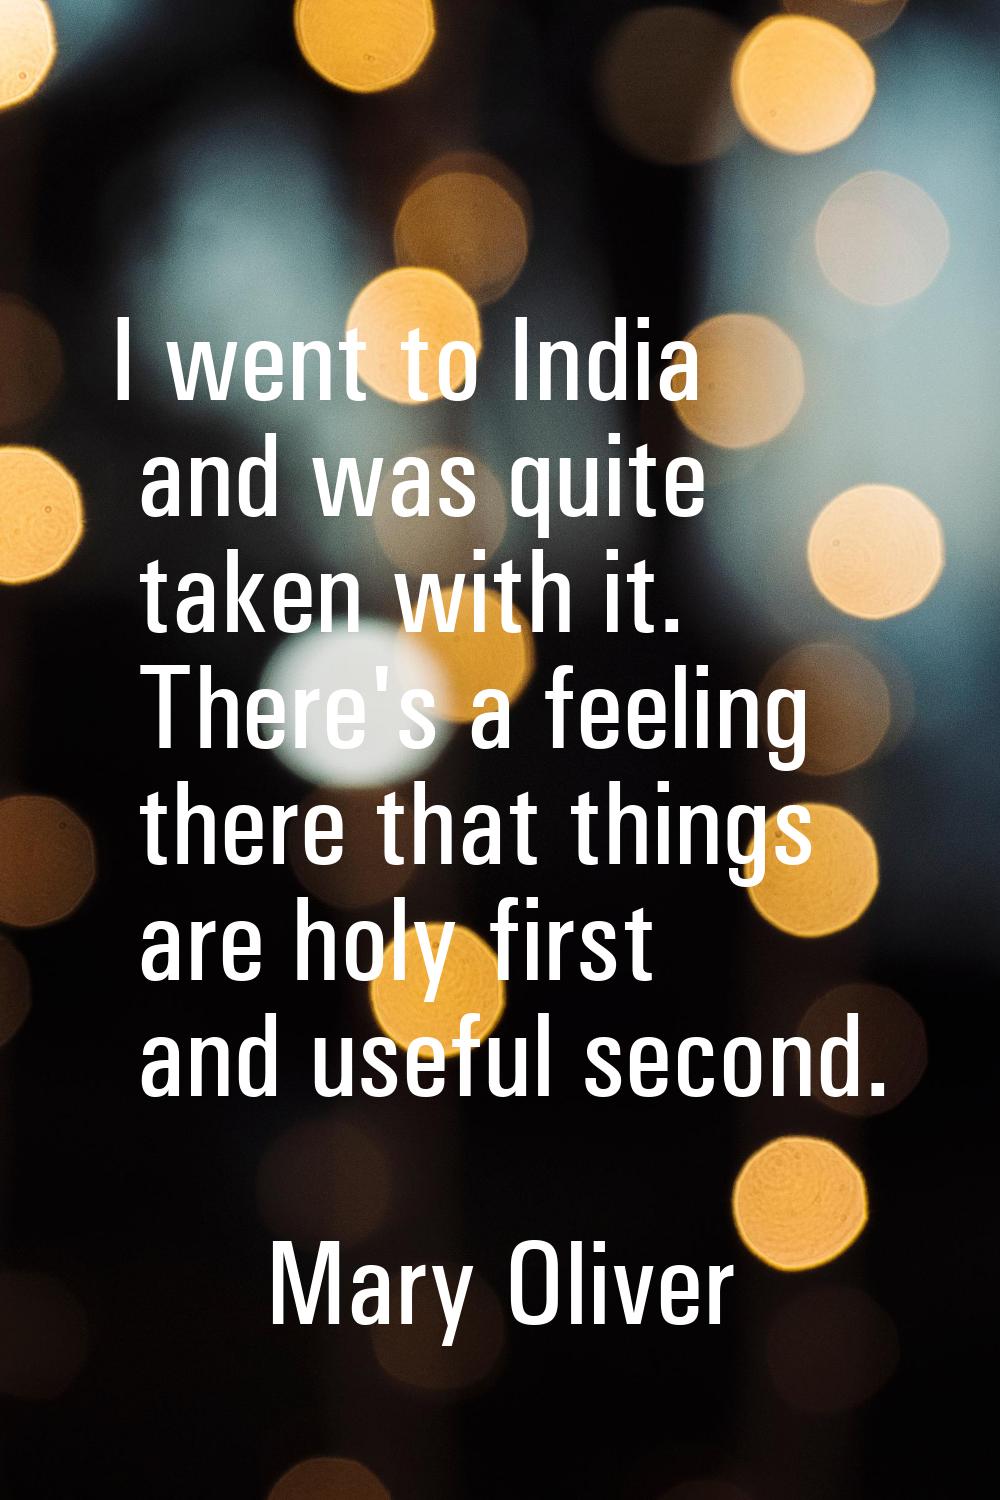 I went to India and was quite taken with it. There's a feeling there that things are holy first and